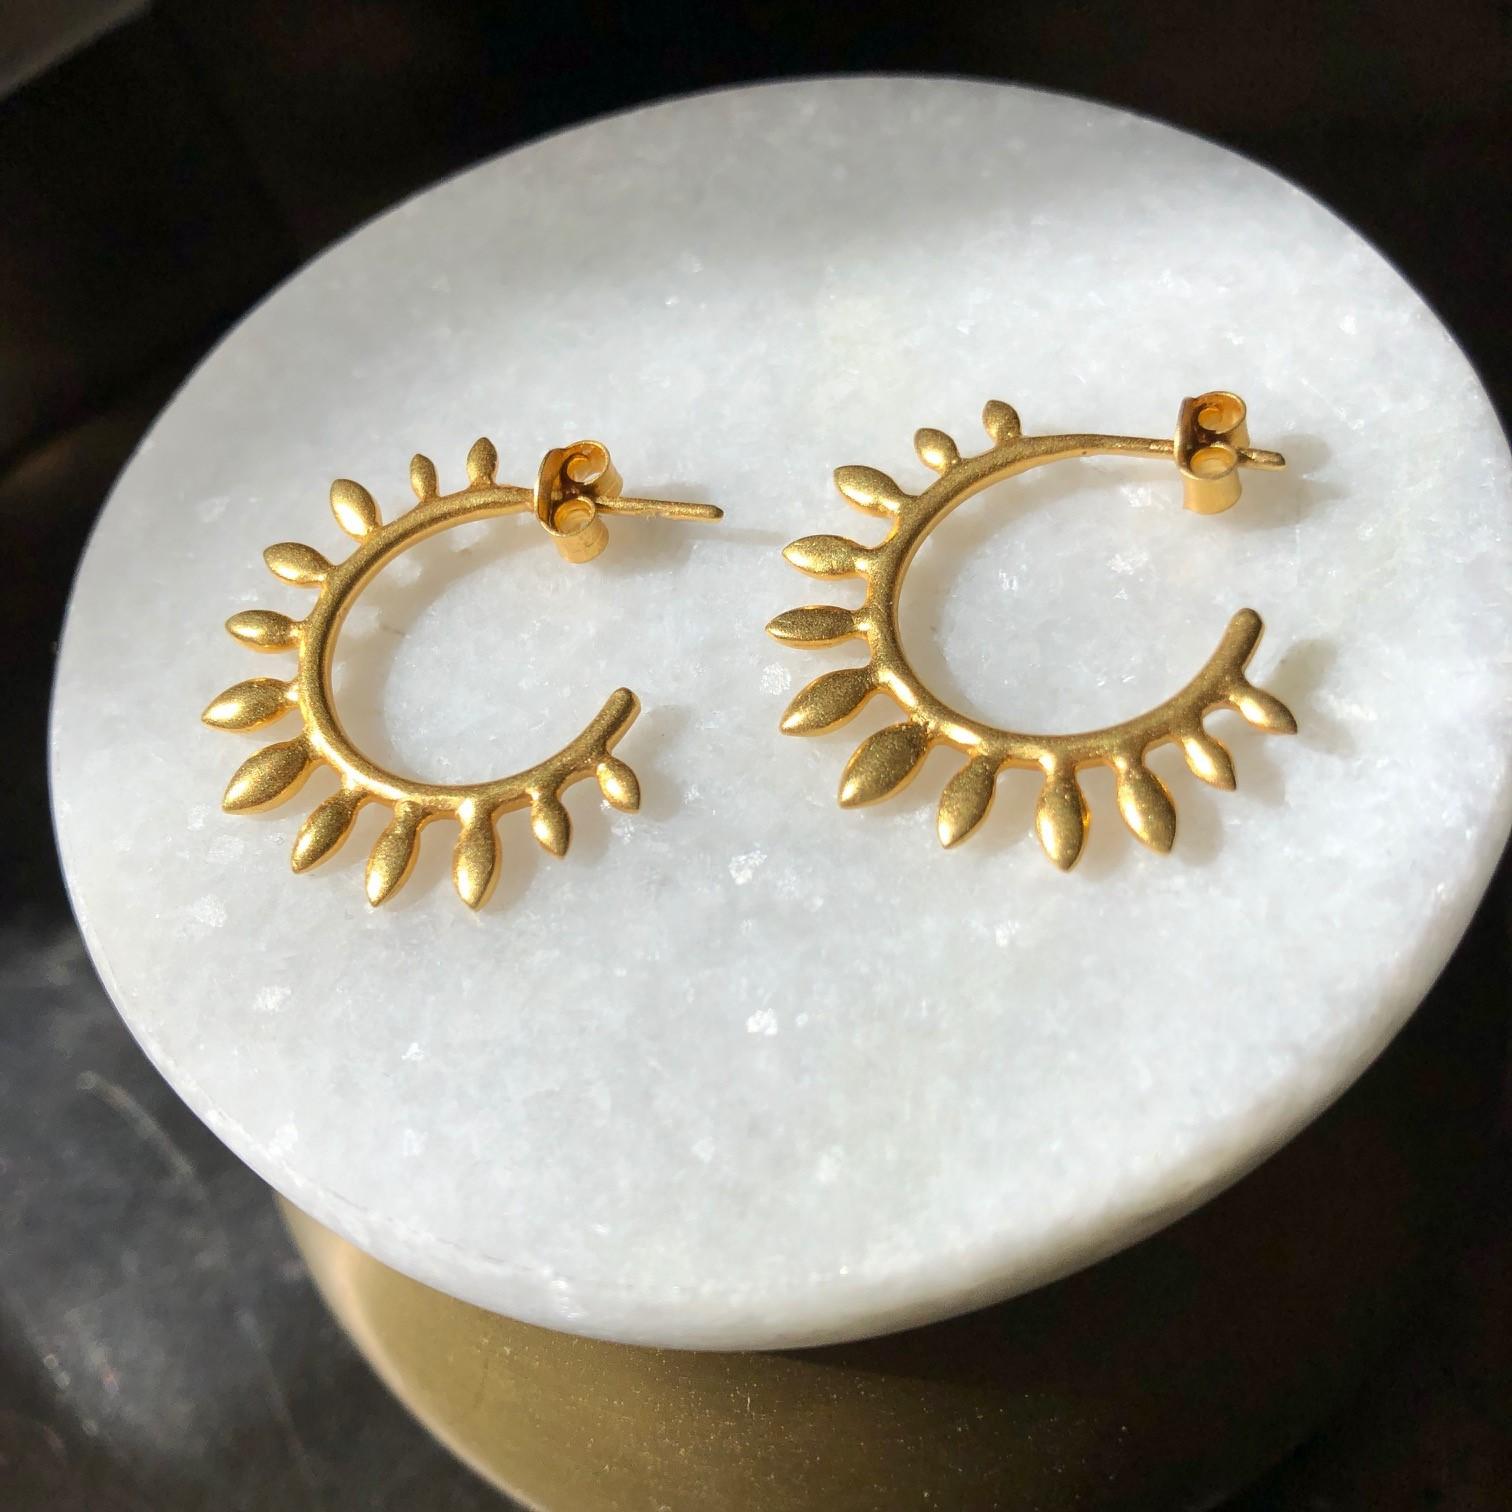 Organic and contemporary, these spiked leaf hoops are solid 18kt Gold, in a soft matte finish.  Incredibly light weight, these earrings will be the earrings you reach for every day.  Outside size is about the size of a quarter.  Ships directly from